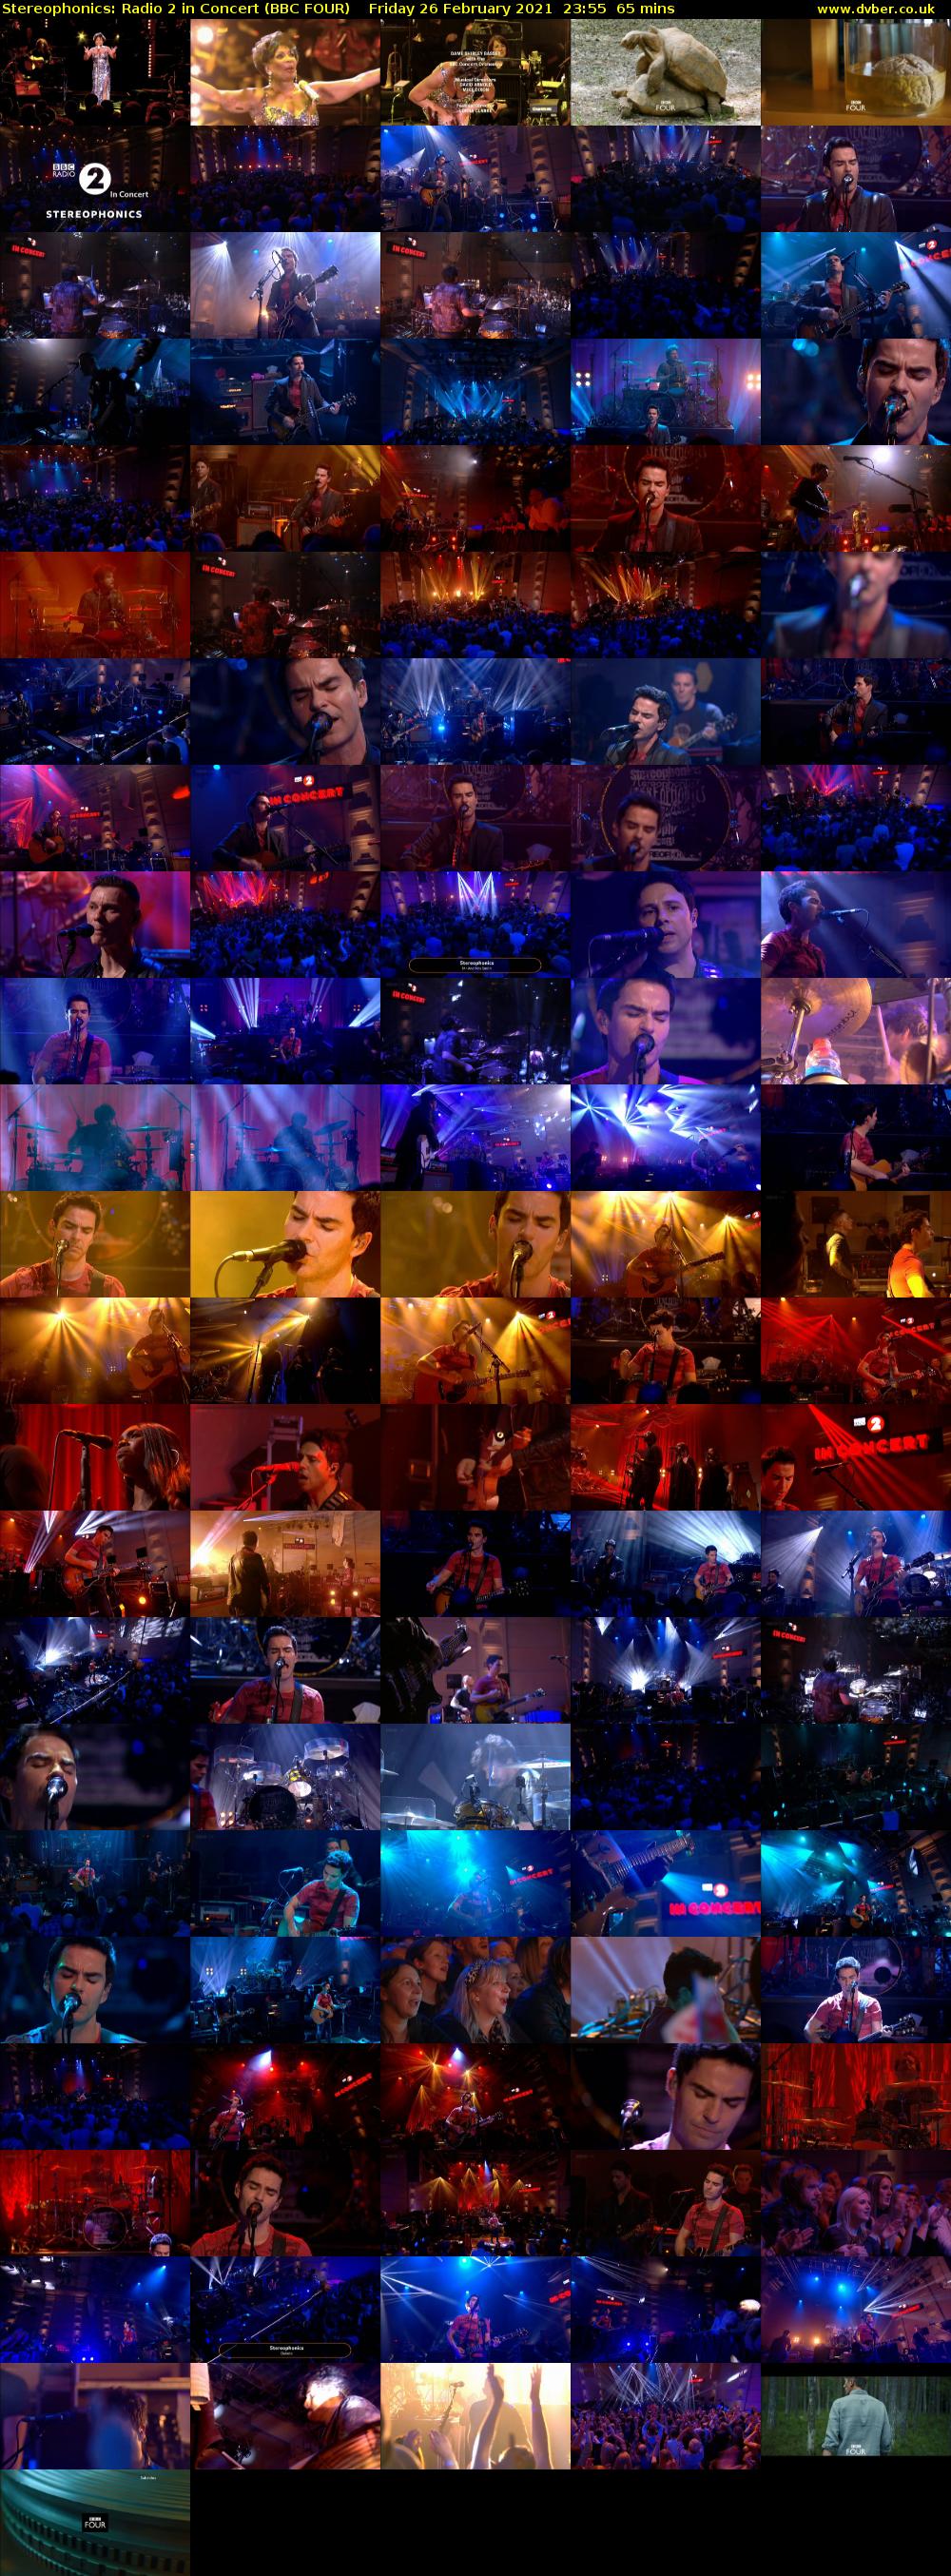 Stereophonics: Radio 2 in Concert (BBC FOUR) Friday 26 February 2021 23:55 - 01:00